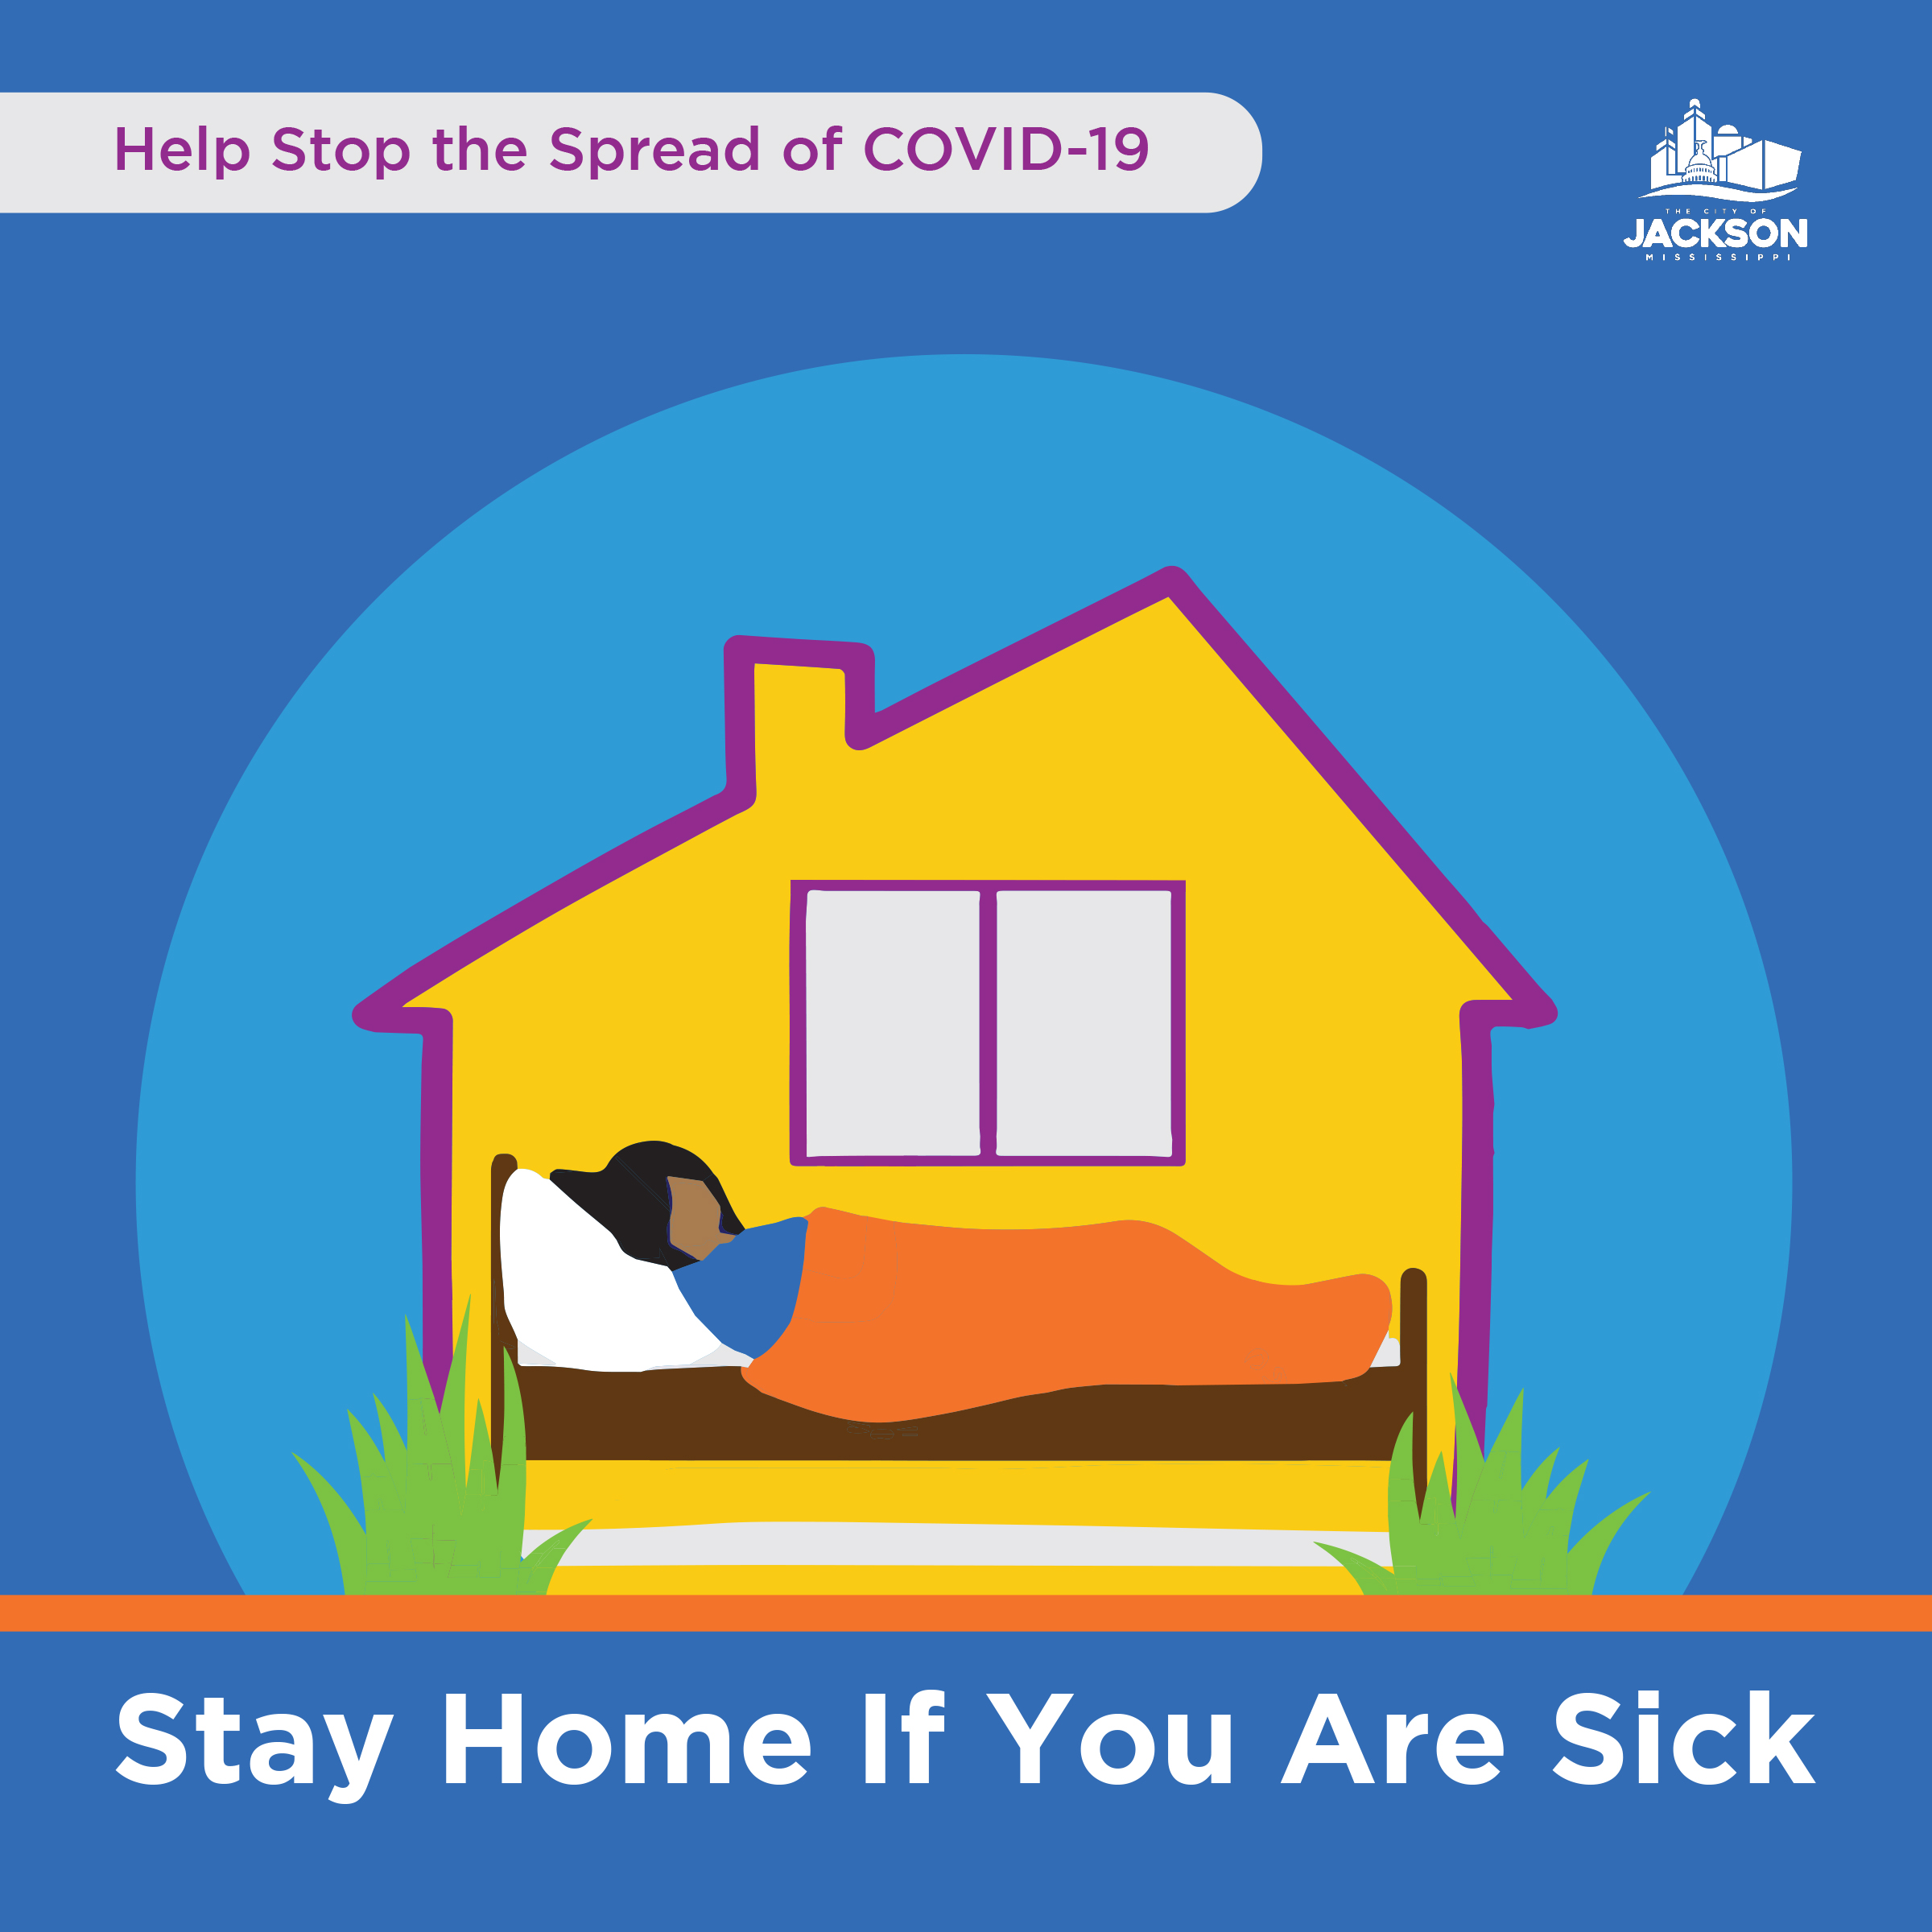 3. Stay Home if Sick